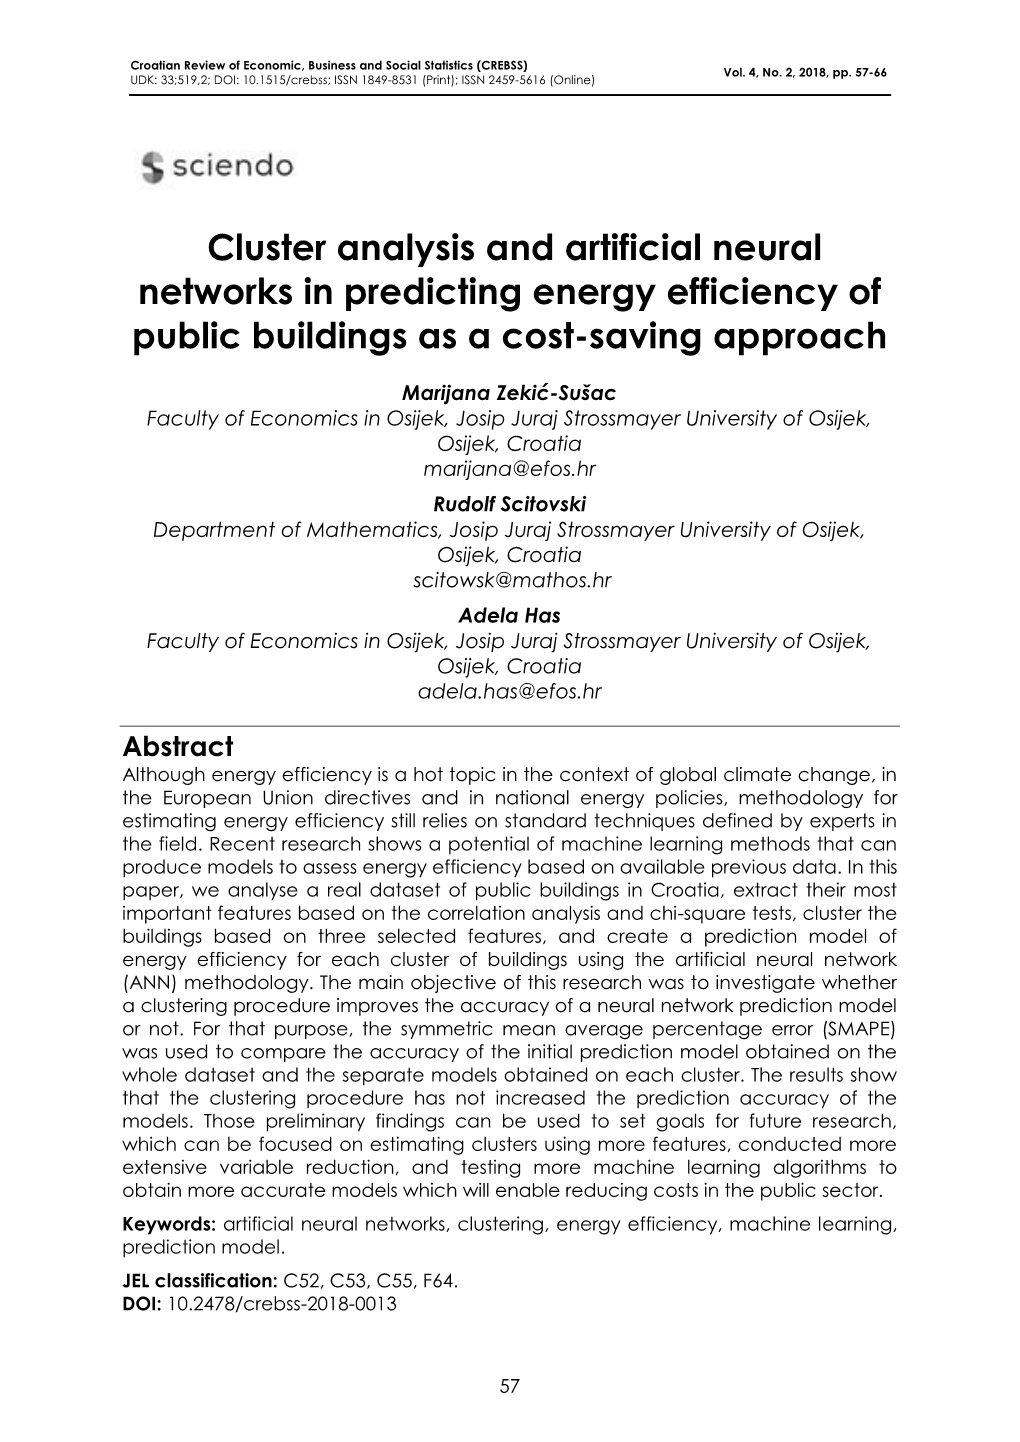 Cluster Analysis and Artificial Neural Networks in Predicting Energy Efficiency of Public Buildings As a Cost-Saving Approach